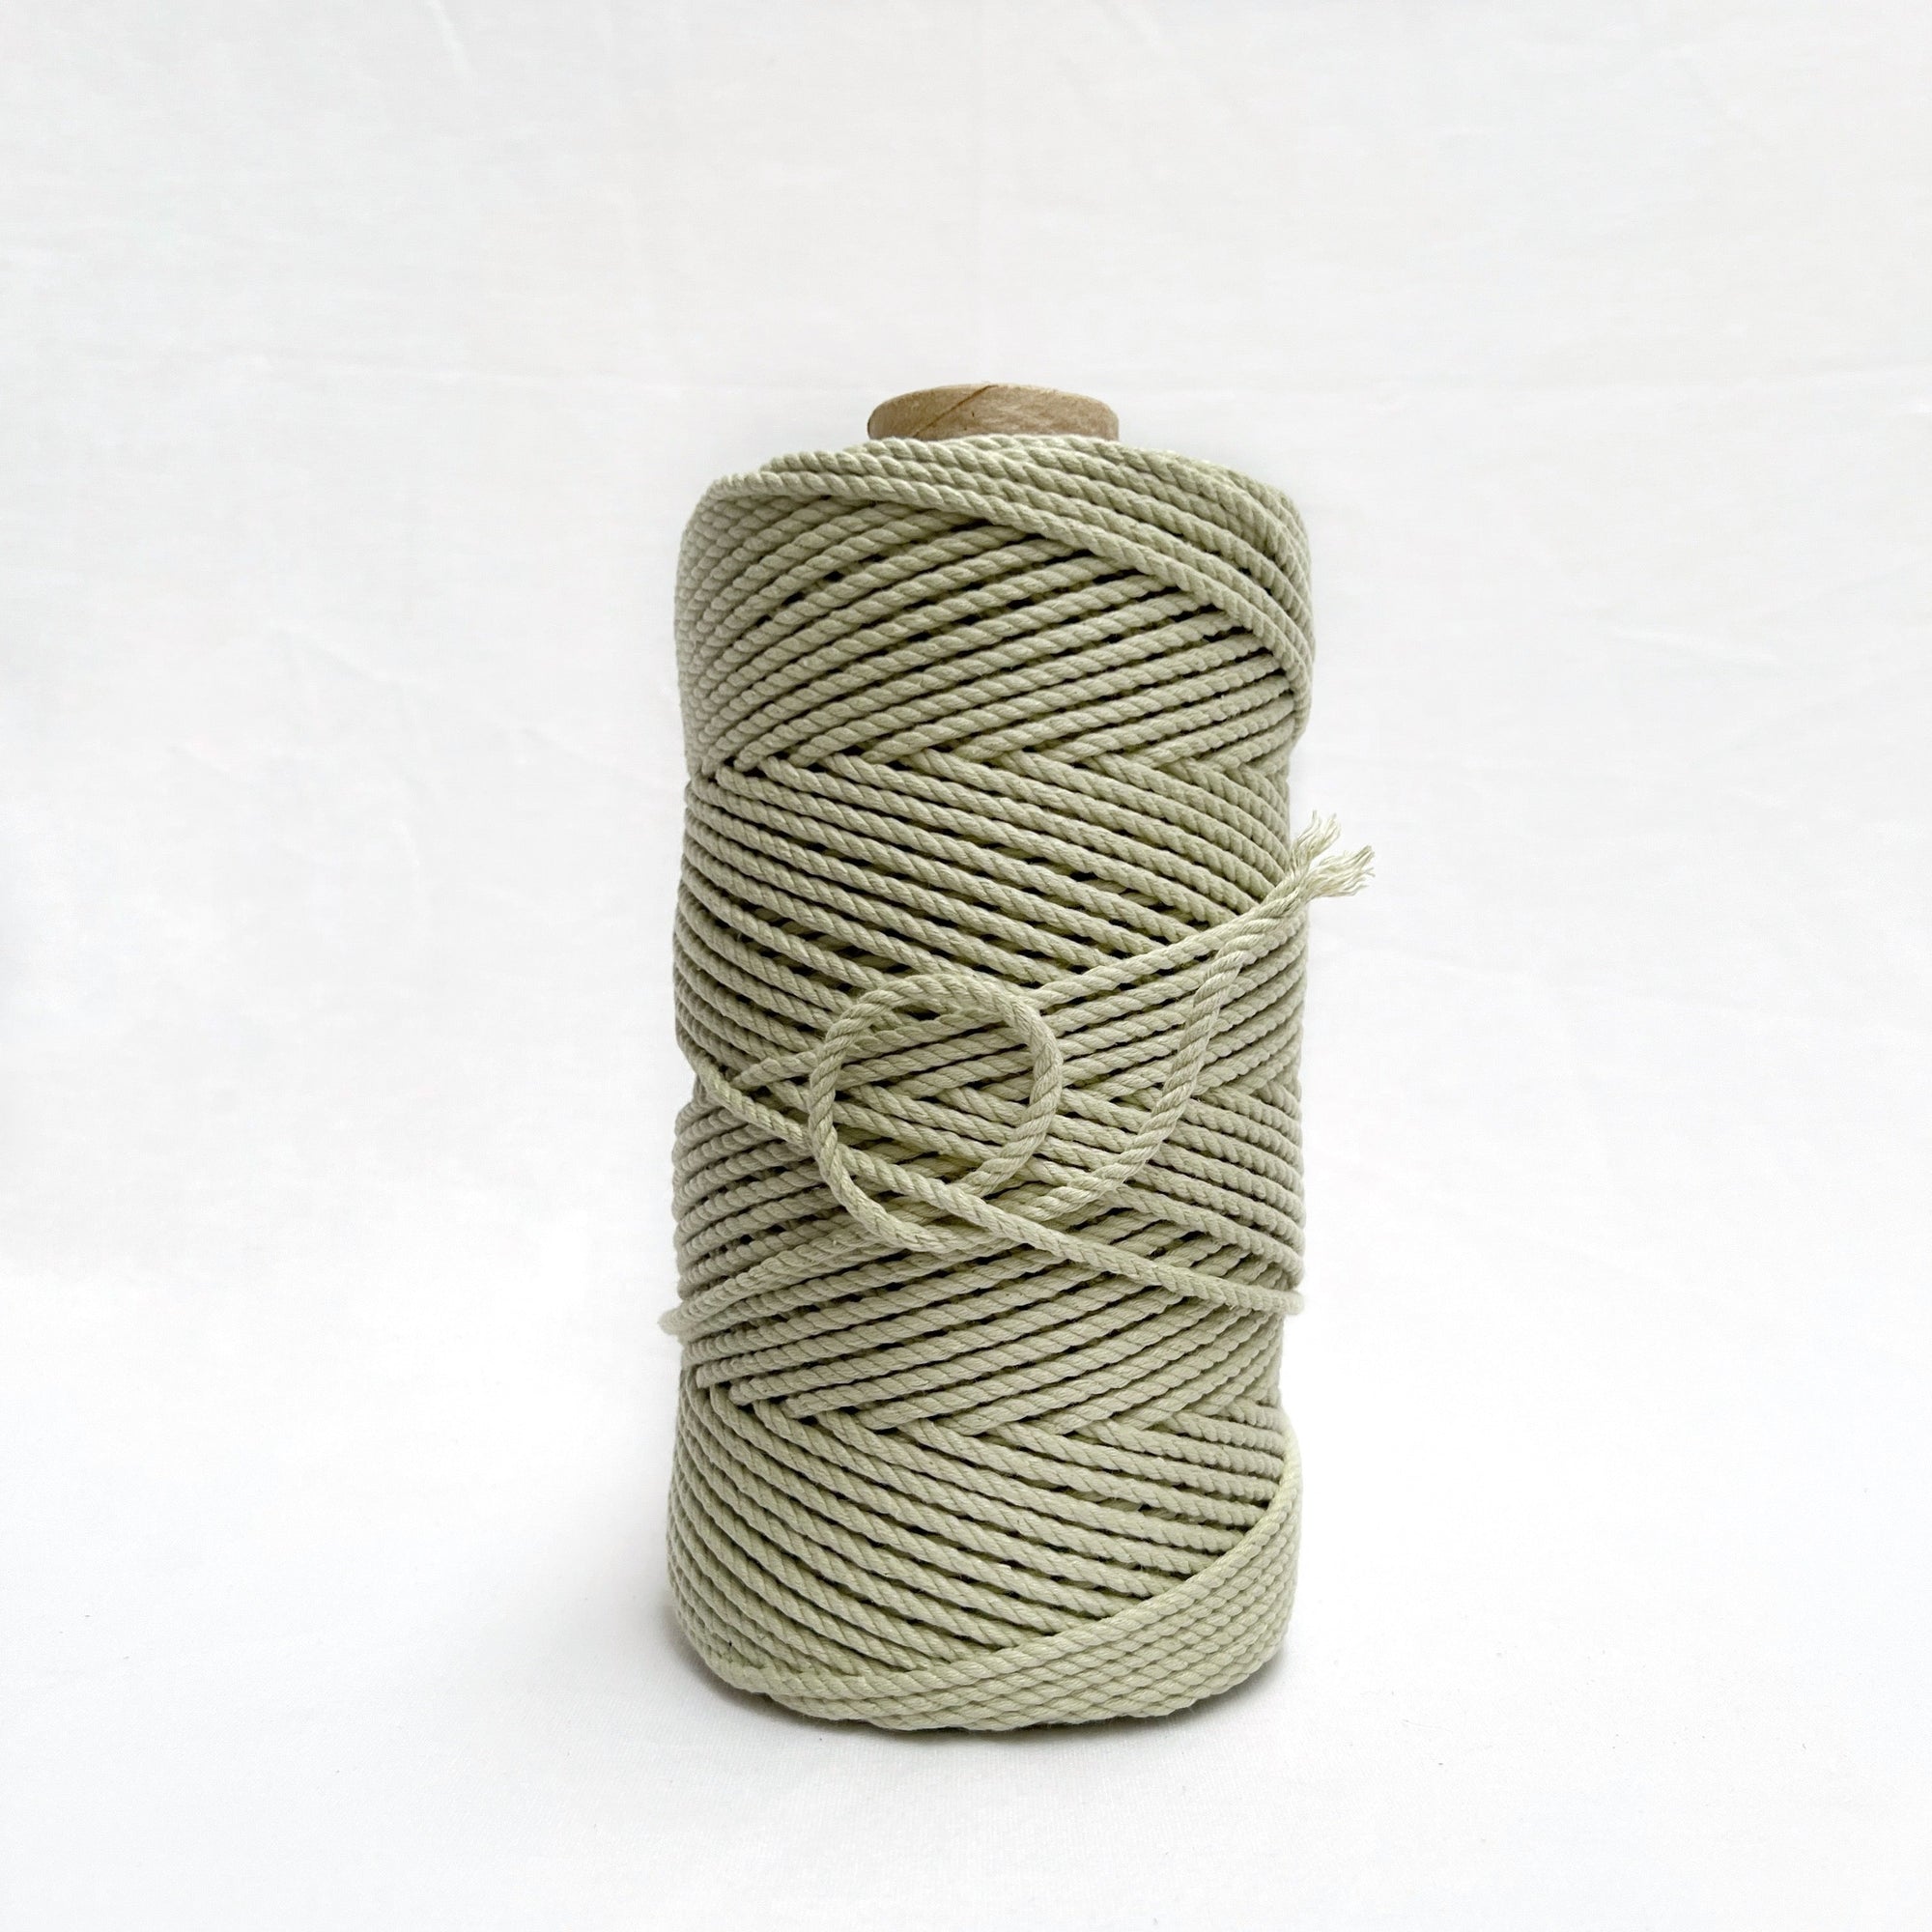 mary maker studio 1kg 4mm recycled cotton macrame rope in iced green tea colour suitable for macrame workshops beginners and advanced artists